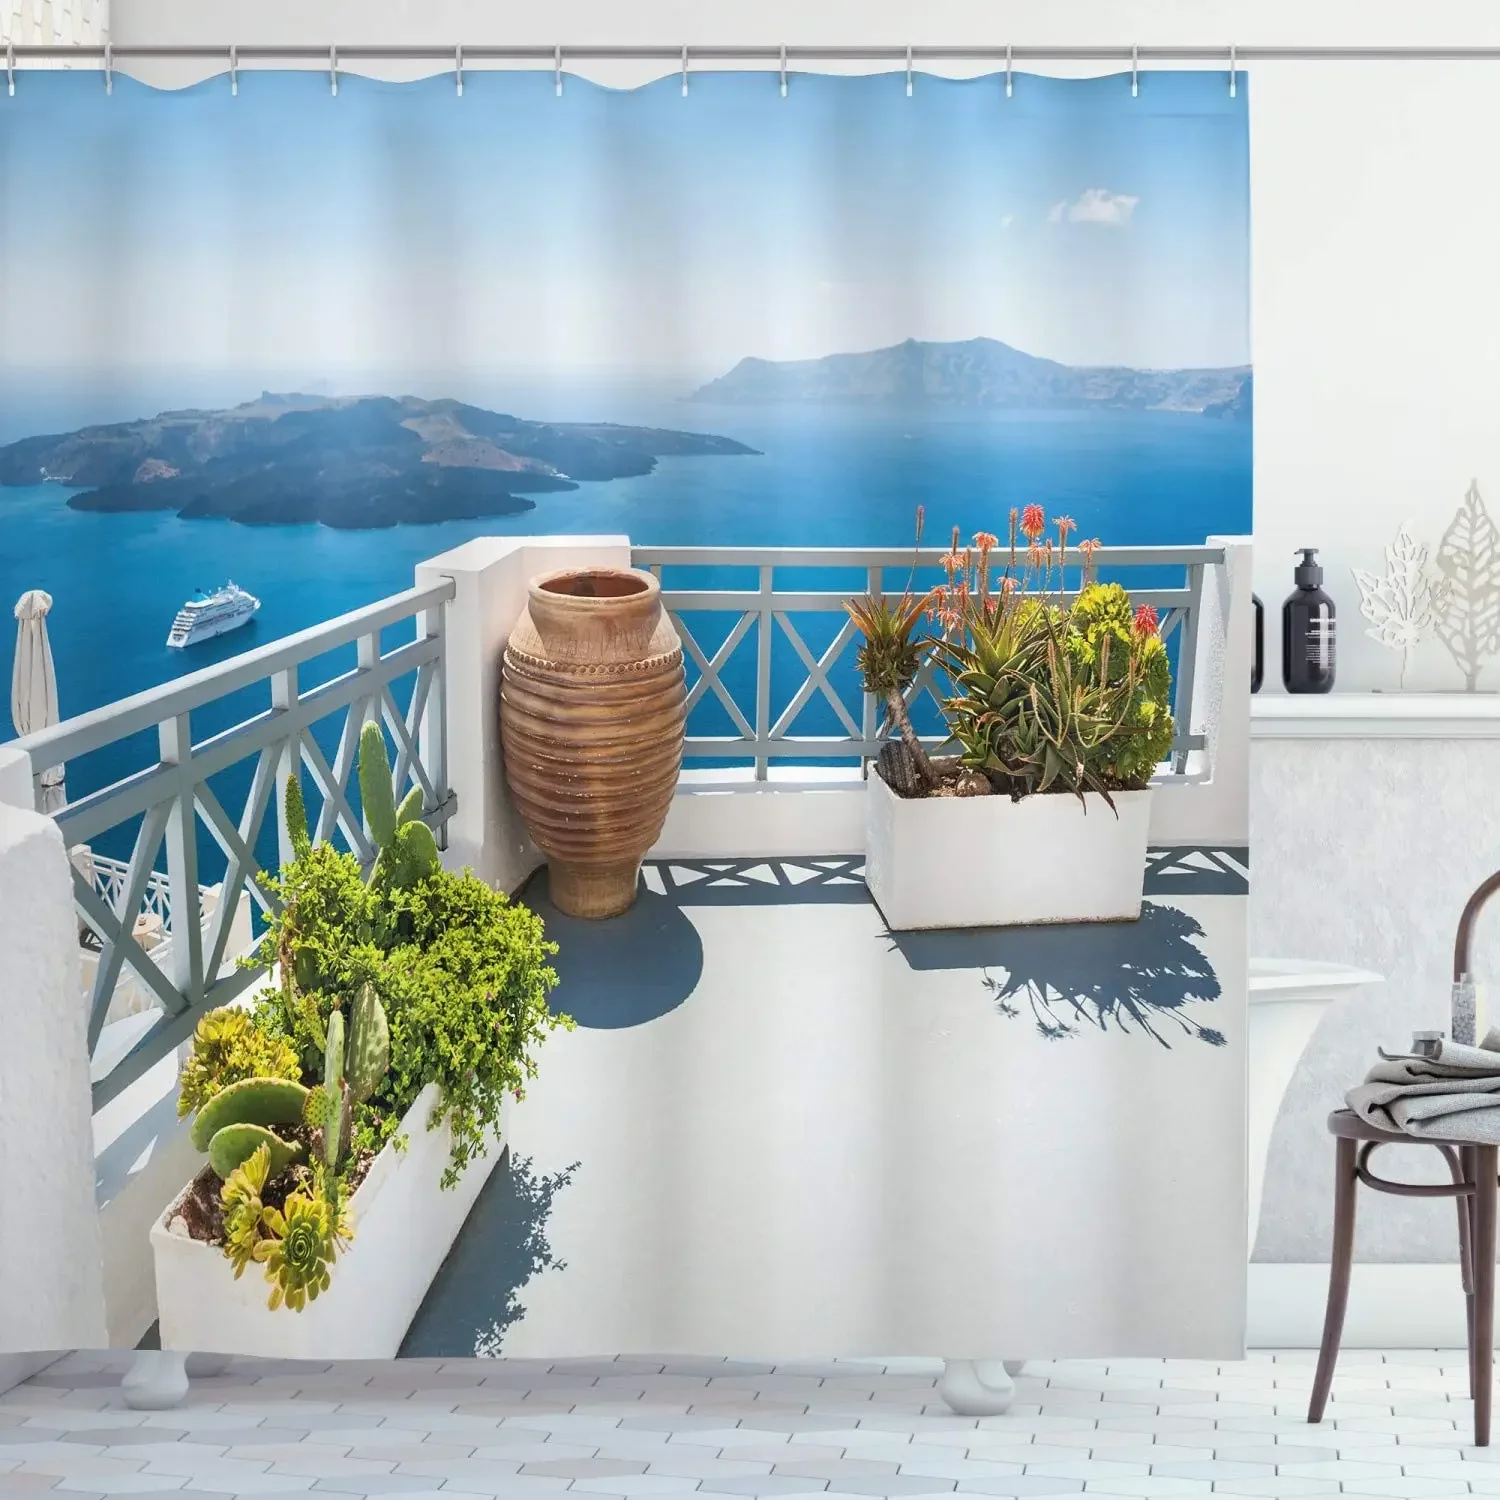 

Ocean Landscape Shower Curtains Sea Island Flowers Plants Mediterranean Nature Scenery Polyester Cloth Bathroom Decor with Hooks